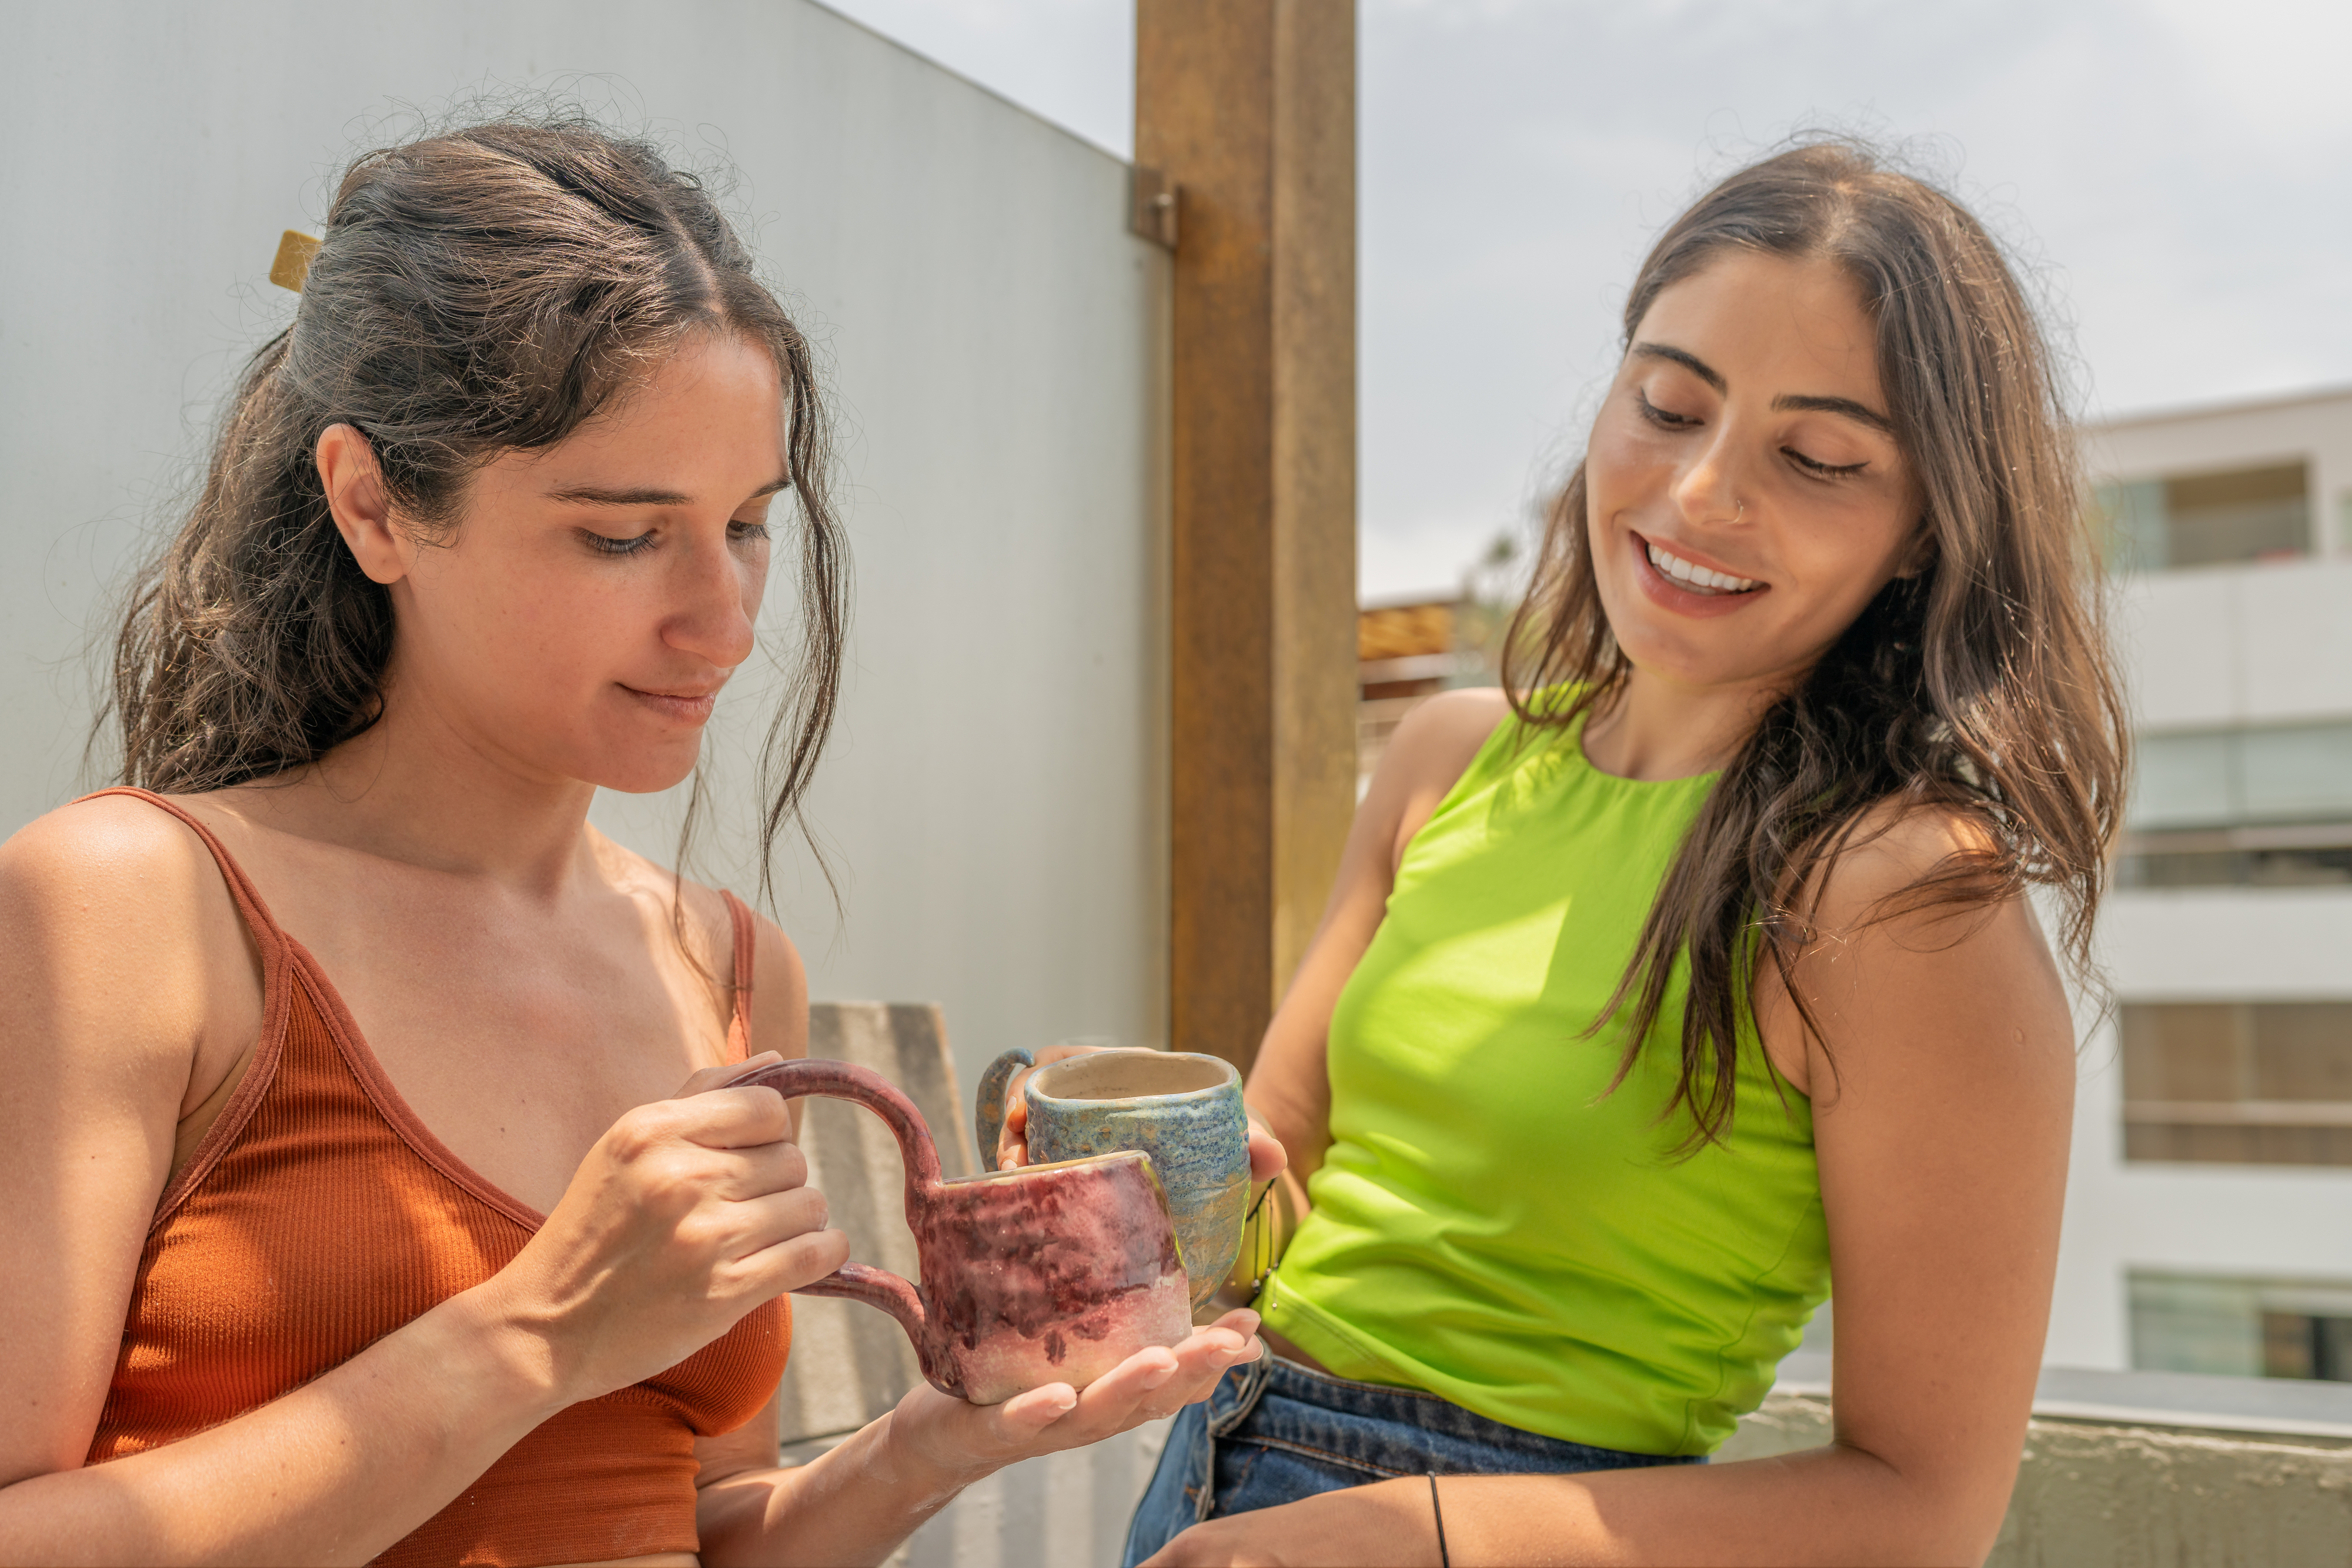 Two women smiling and holding ceramic mugs outdoors